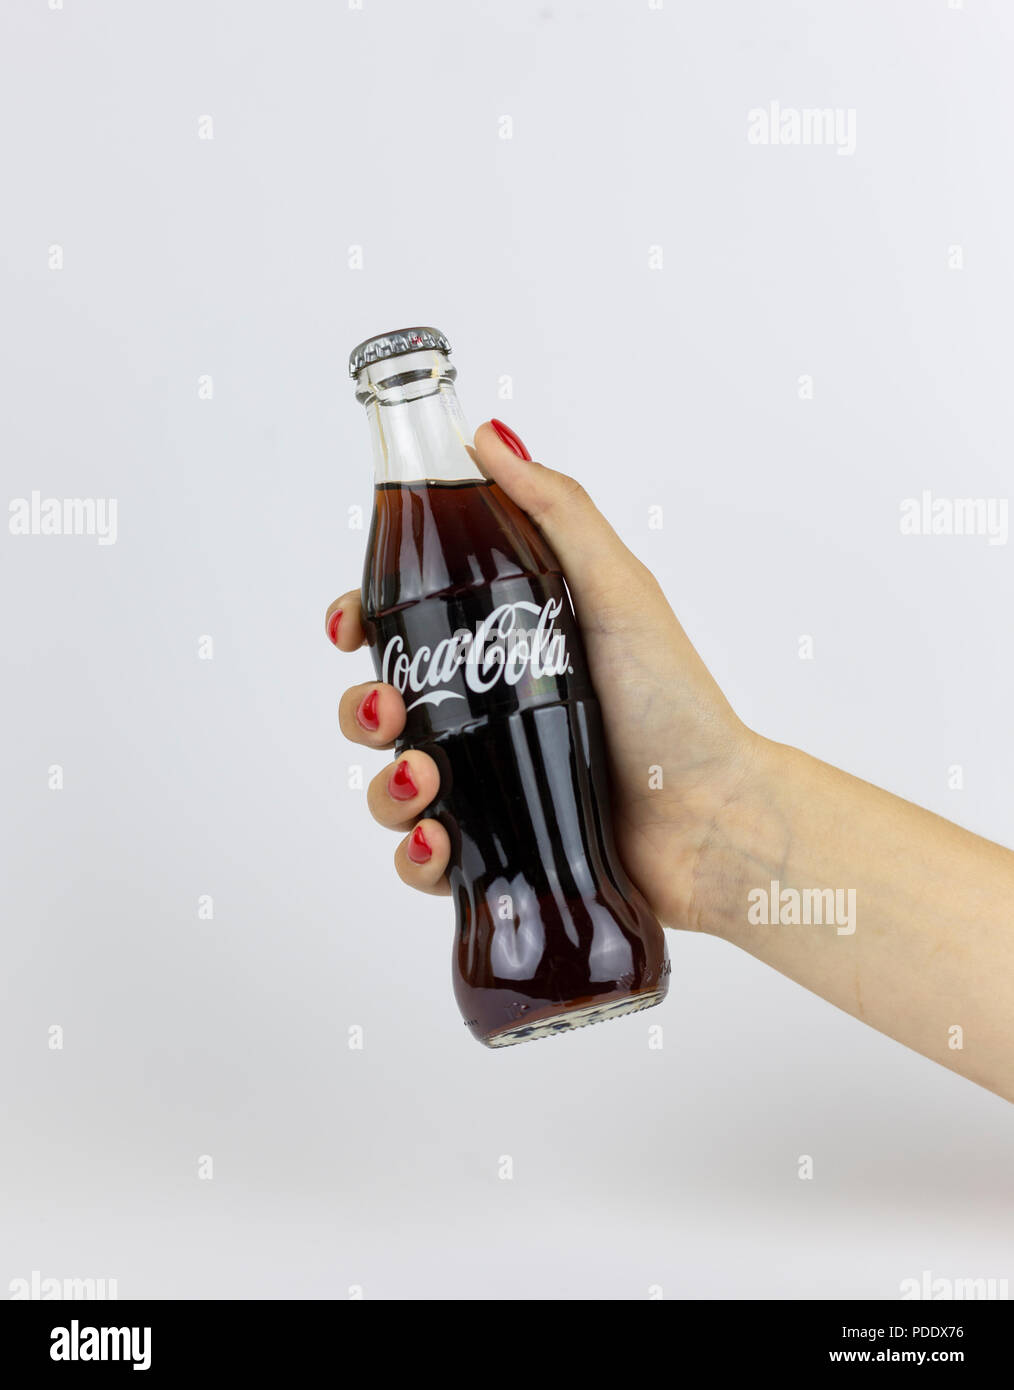 Atlanta, Georgia, USA - July 22, 2018: woman hand with red nails holding glass coca-cola contour classic bottle from with white painted logo from USA on white background Stock Photo